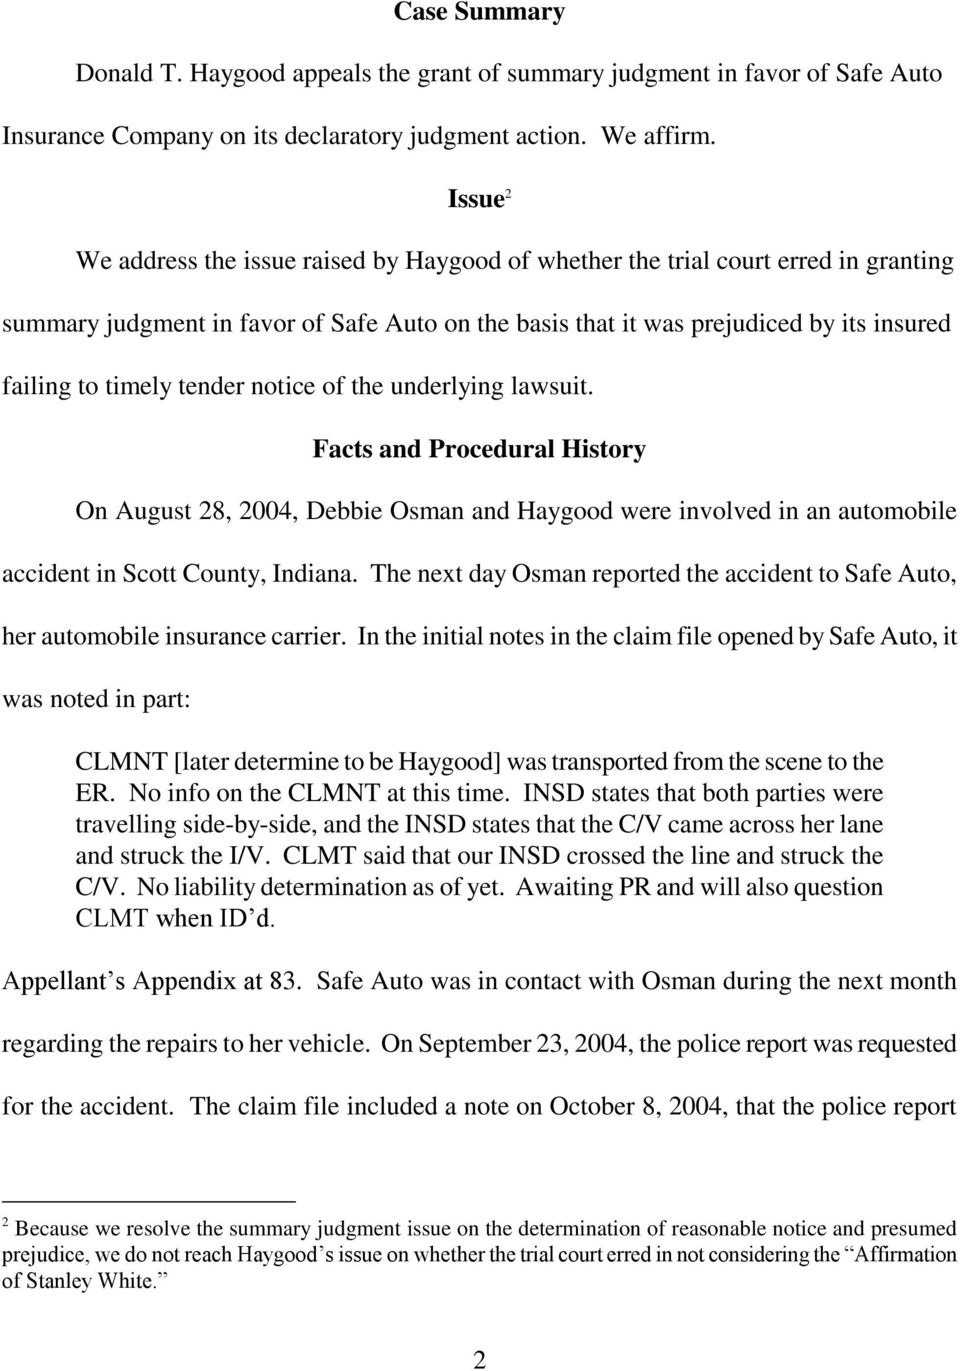 tender notice of the underlying lawsuit. Facts and Procedural History On August 28, 2004, Debbie Osman and Haygood were involved in an automobile accident in Scott County, Indiana.